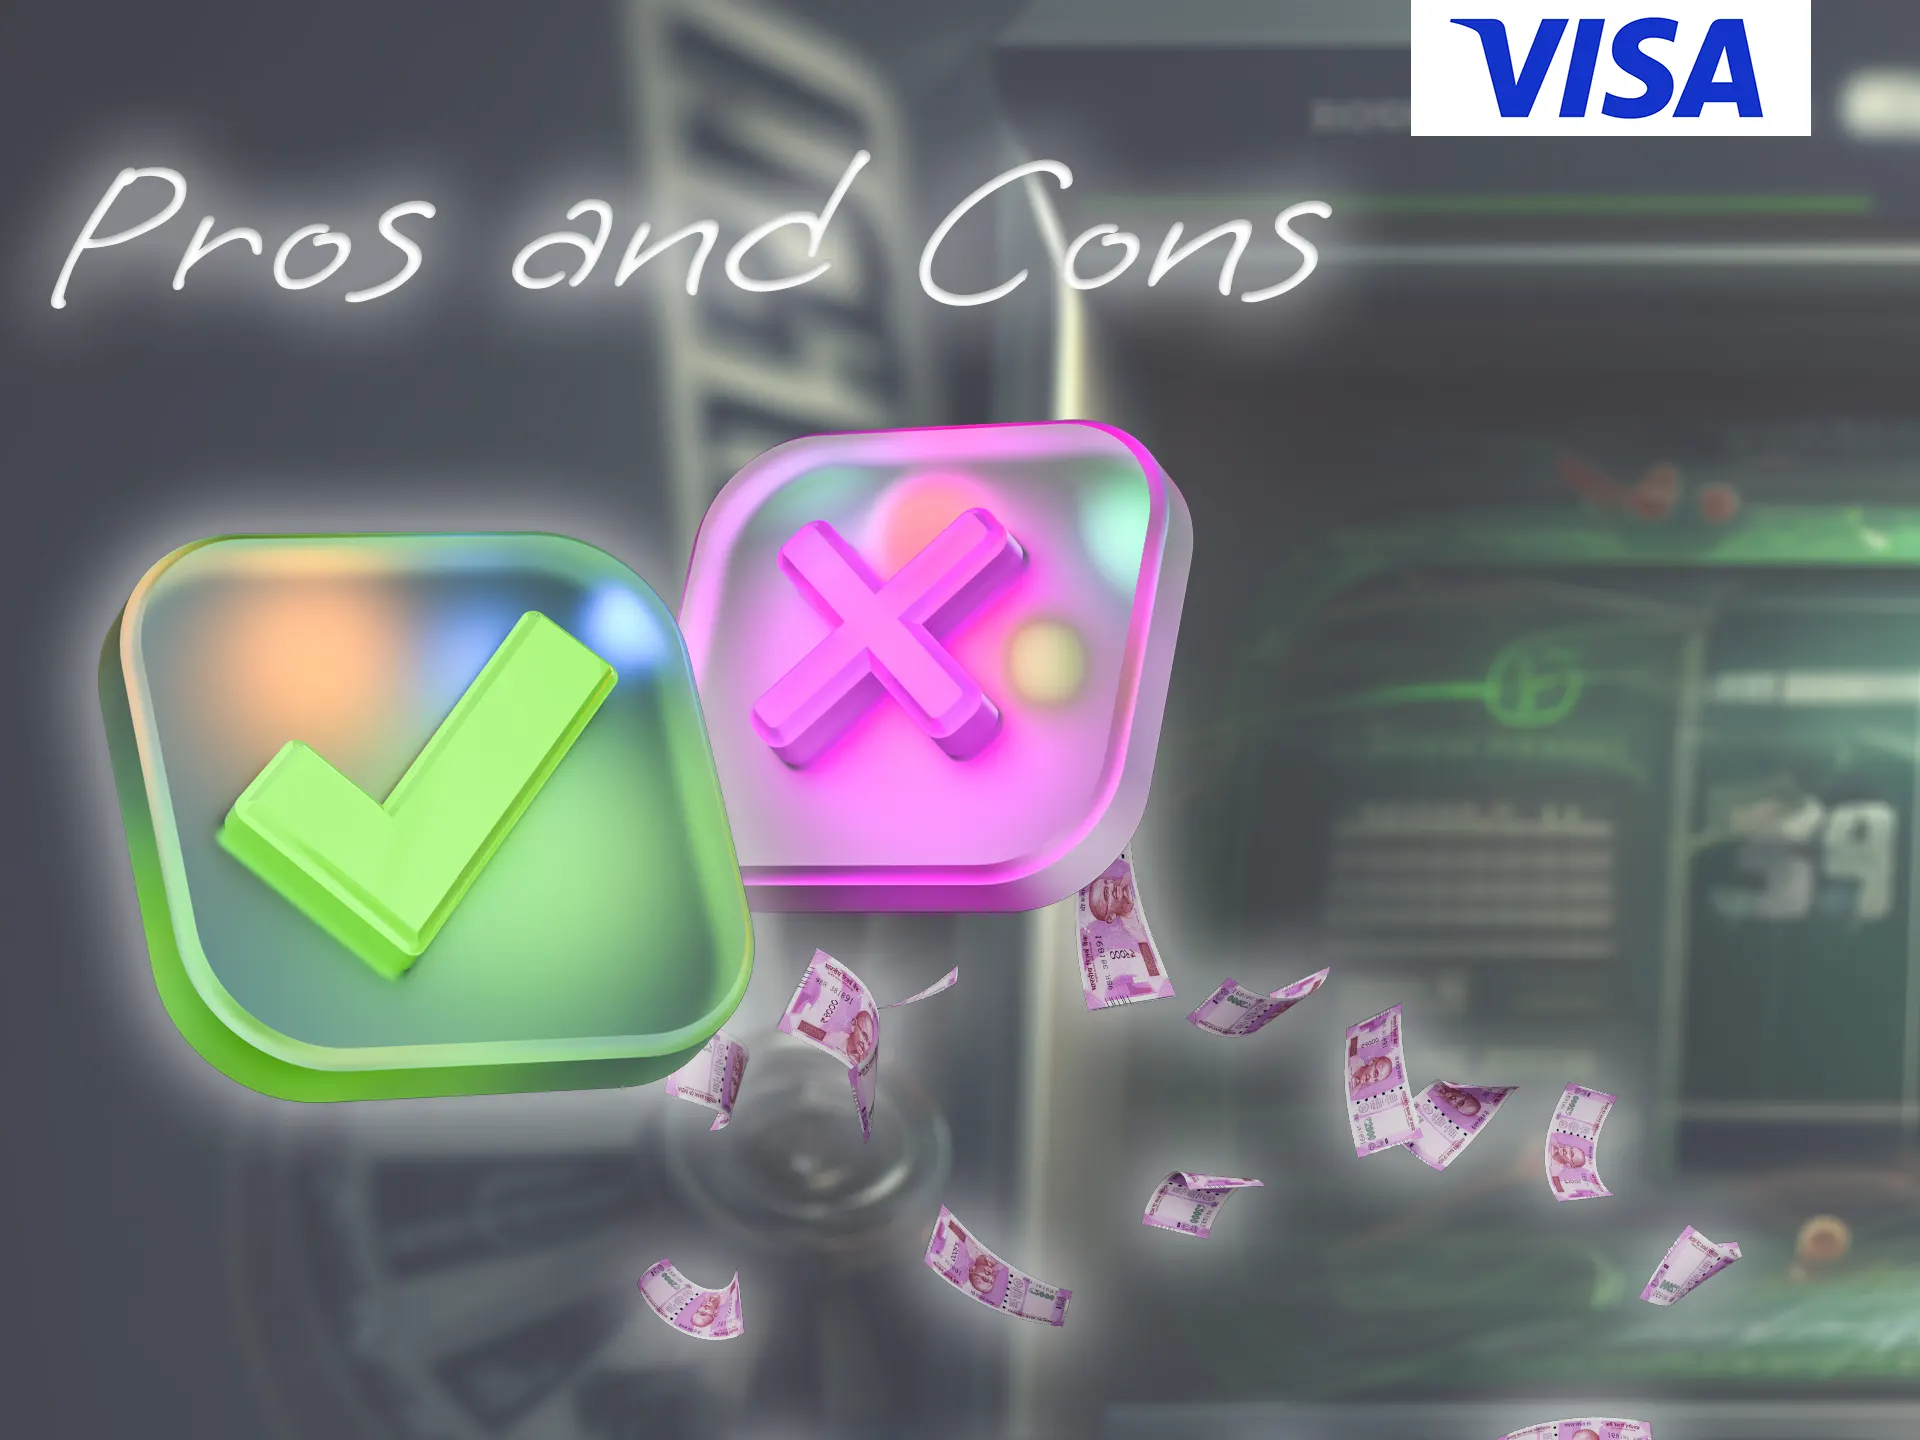 Check out the main pros and cons of Visa.